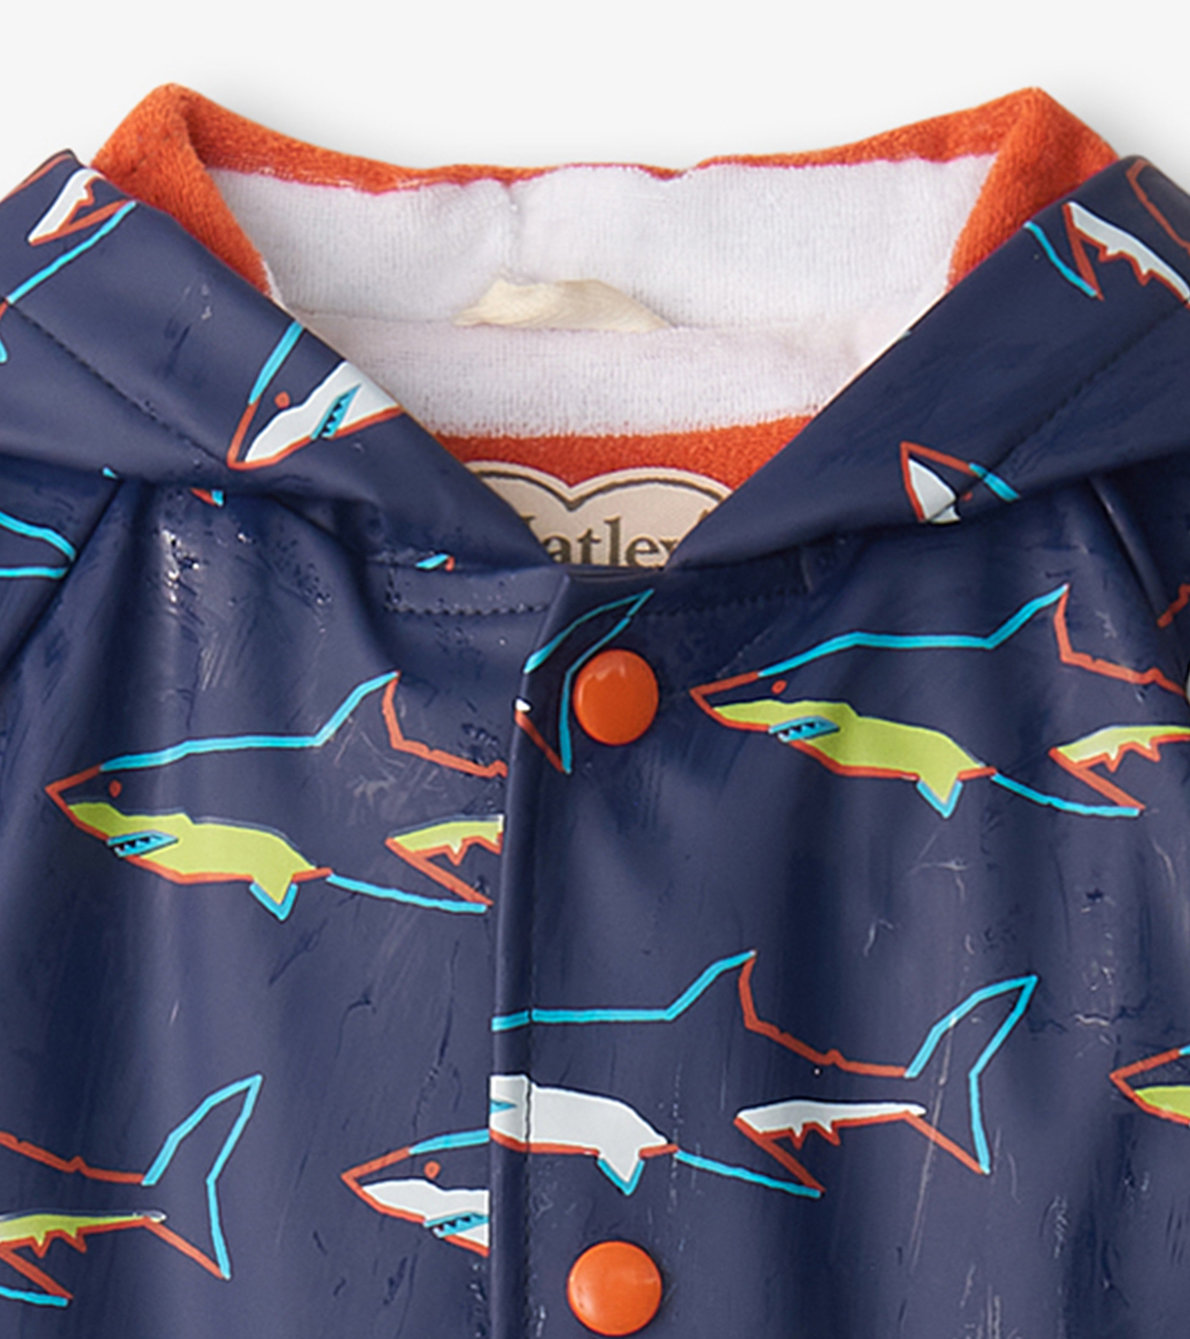 View larger image of Baby & Toddler Boys Sharks Button-Up Rain Jacket